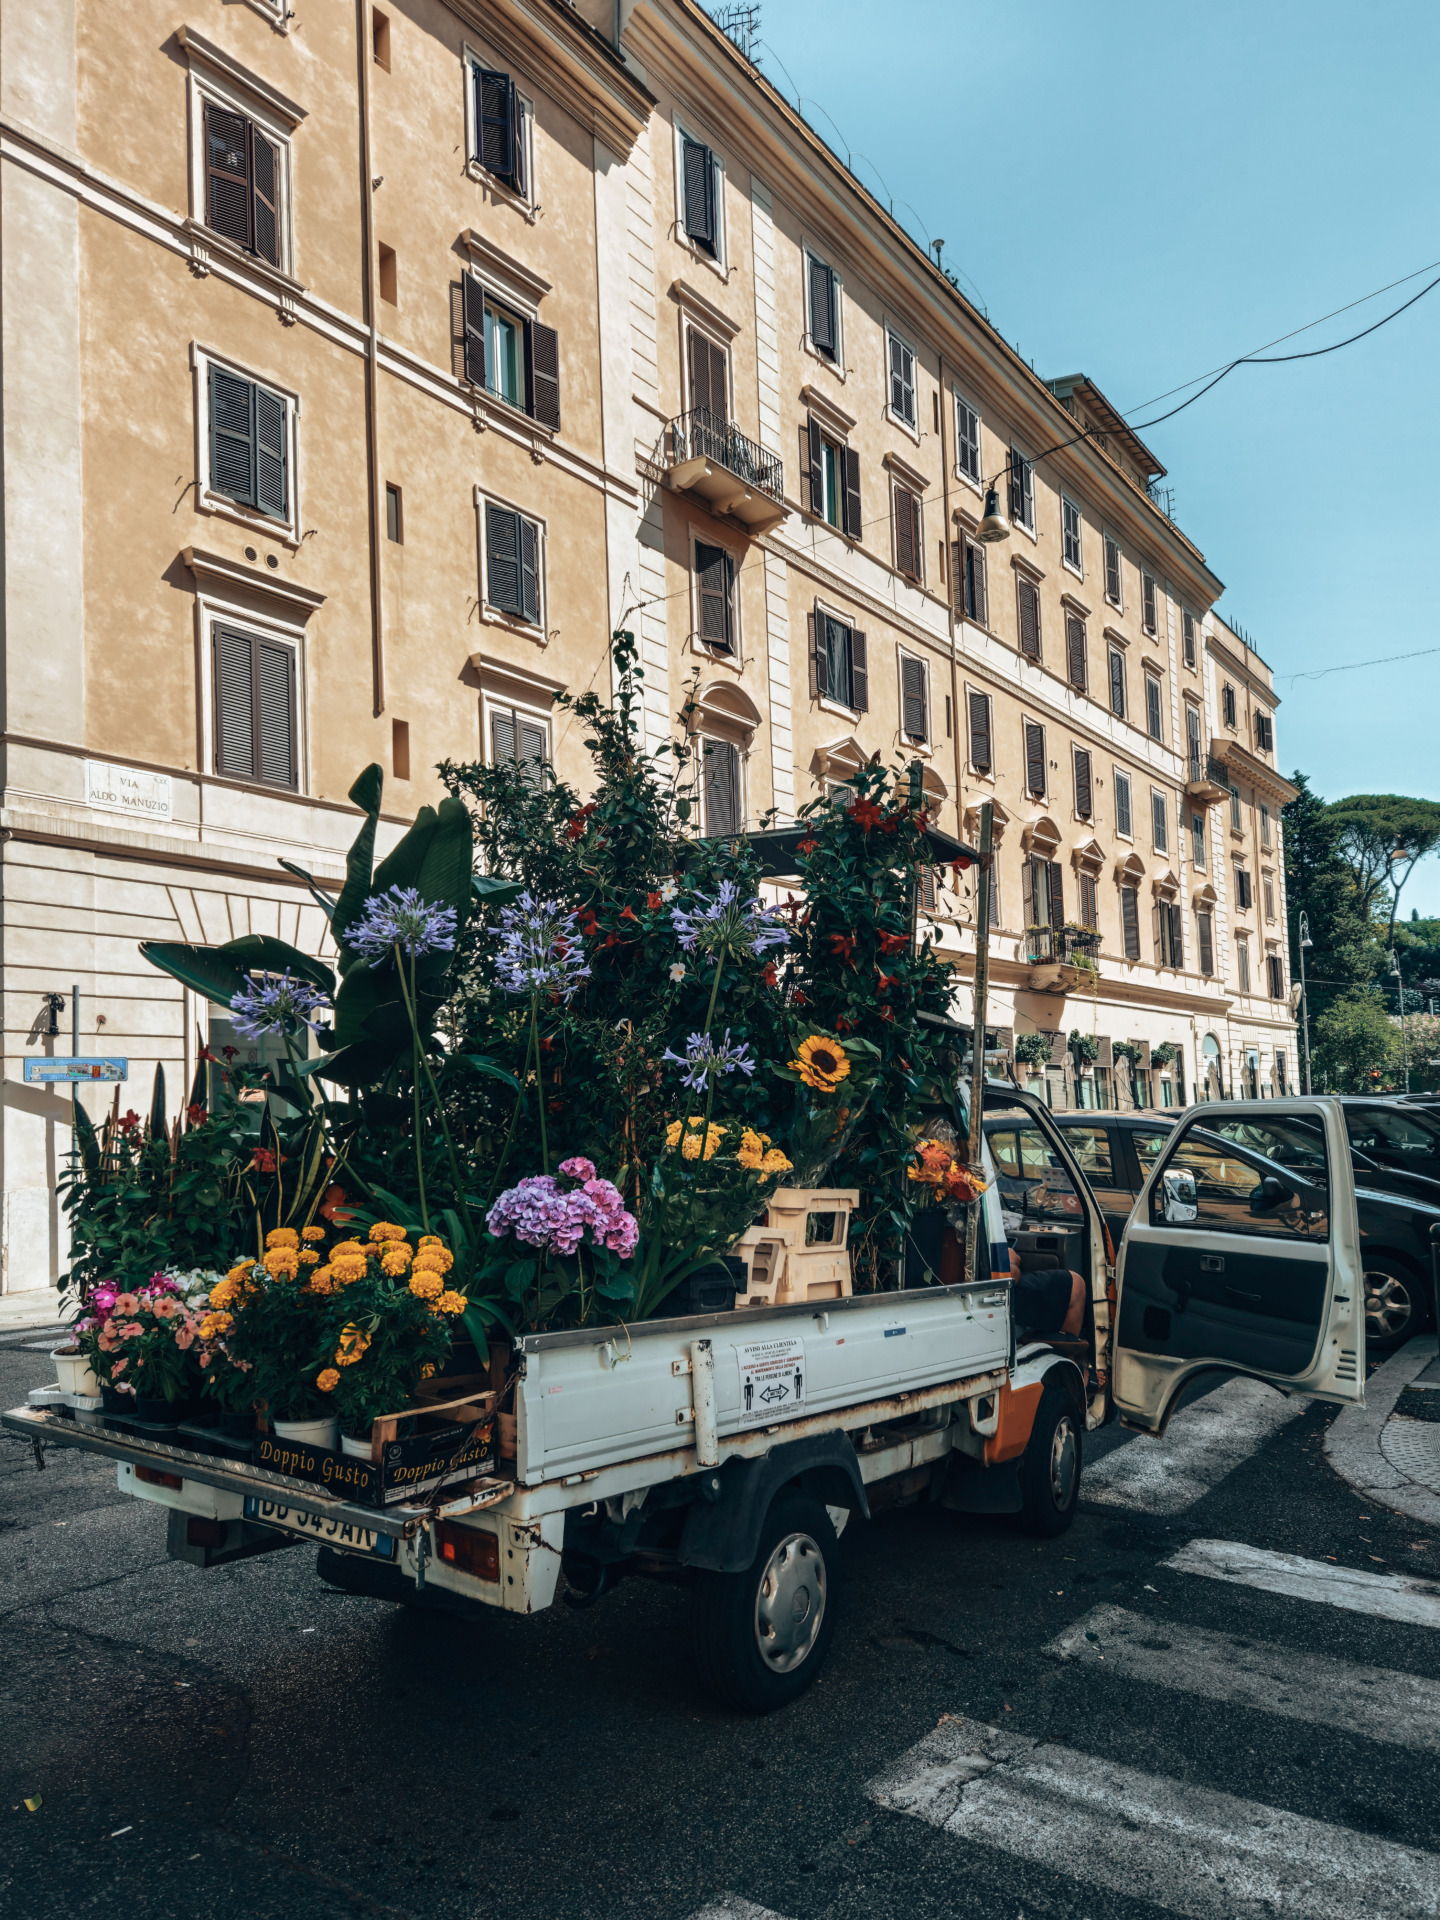 Getting flowers, one of the non-touristy things to do in Rome